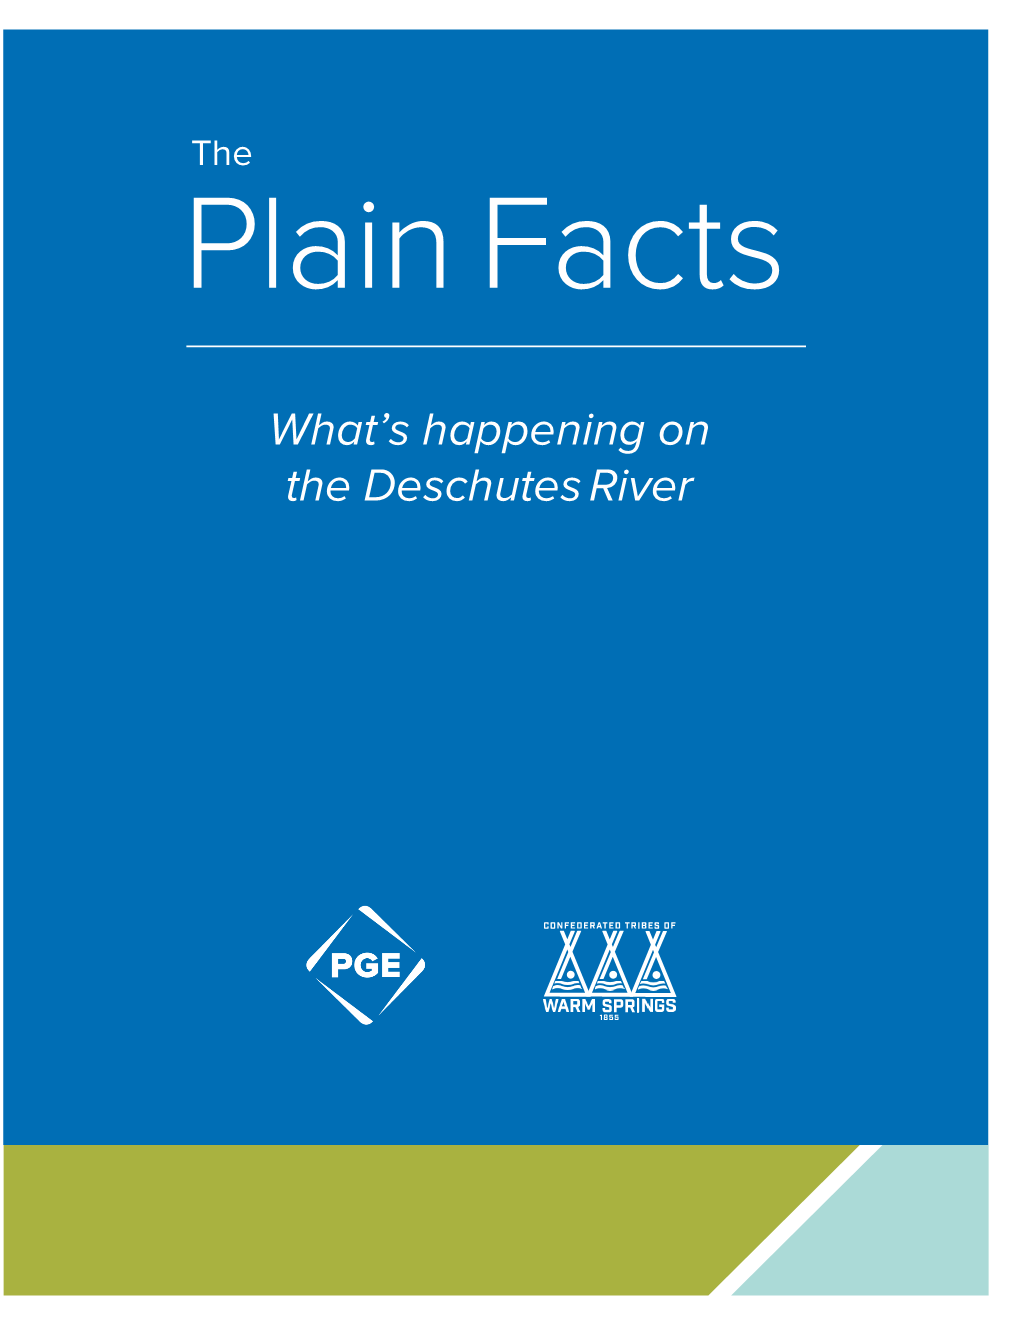 What's Happening on the Deschutes River